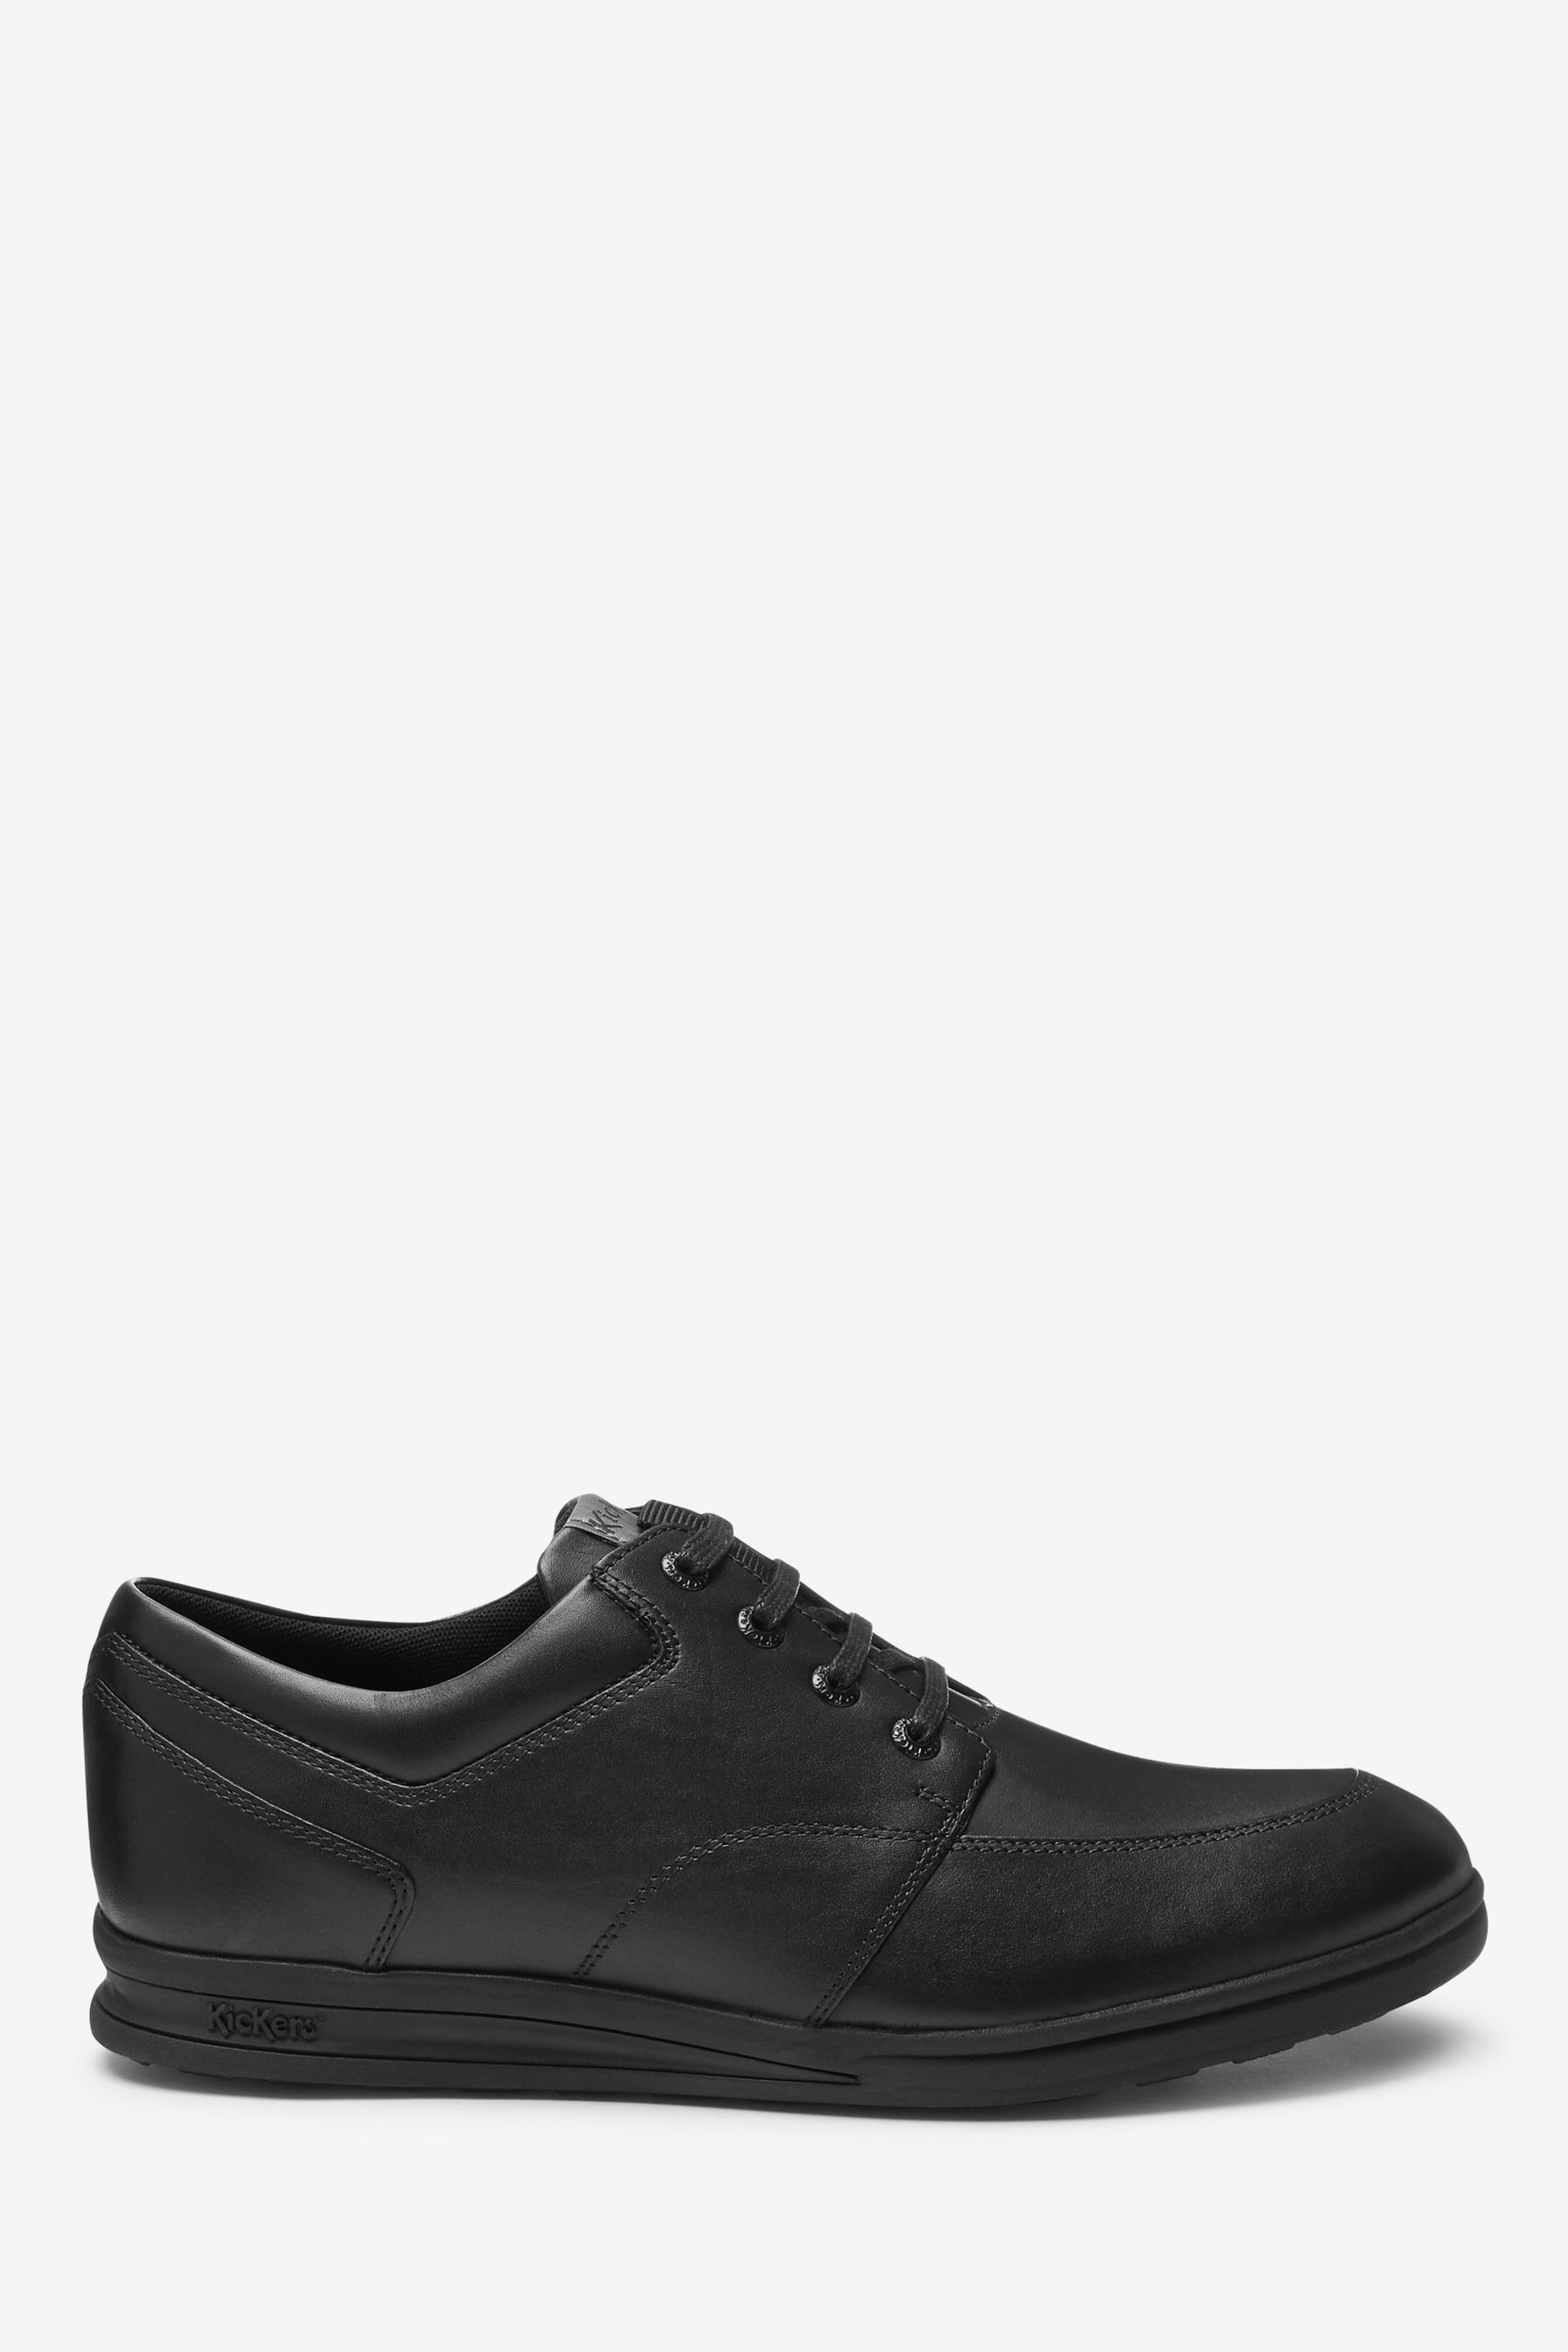 Kickers® Black Troiko Lace Shoes - Image 3 of 8